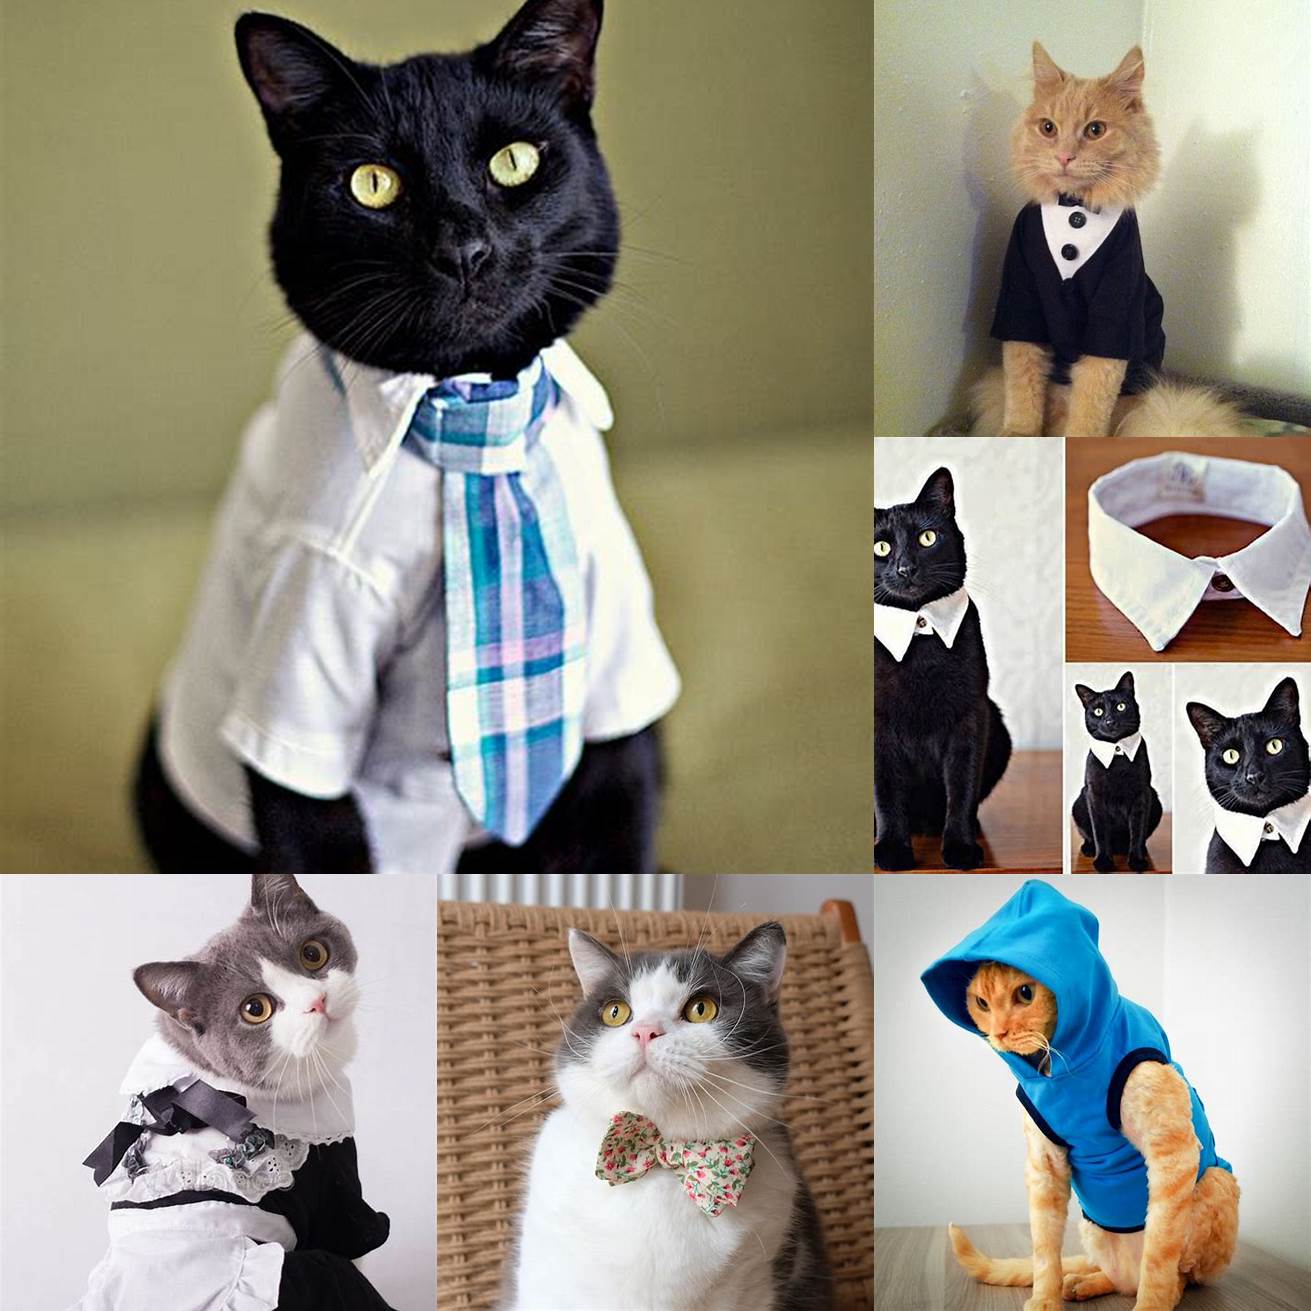 Cat in a dress shirt posing with a tie